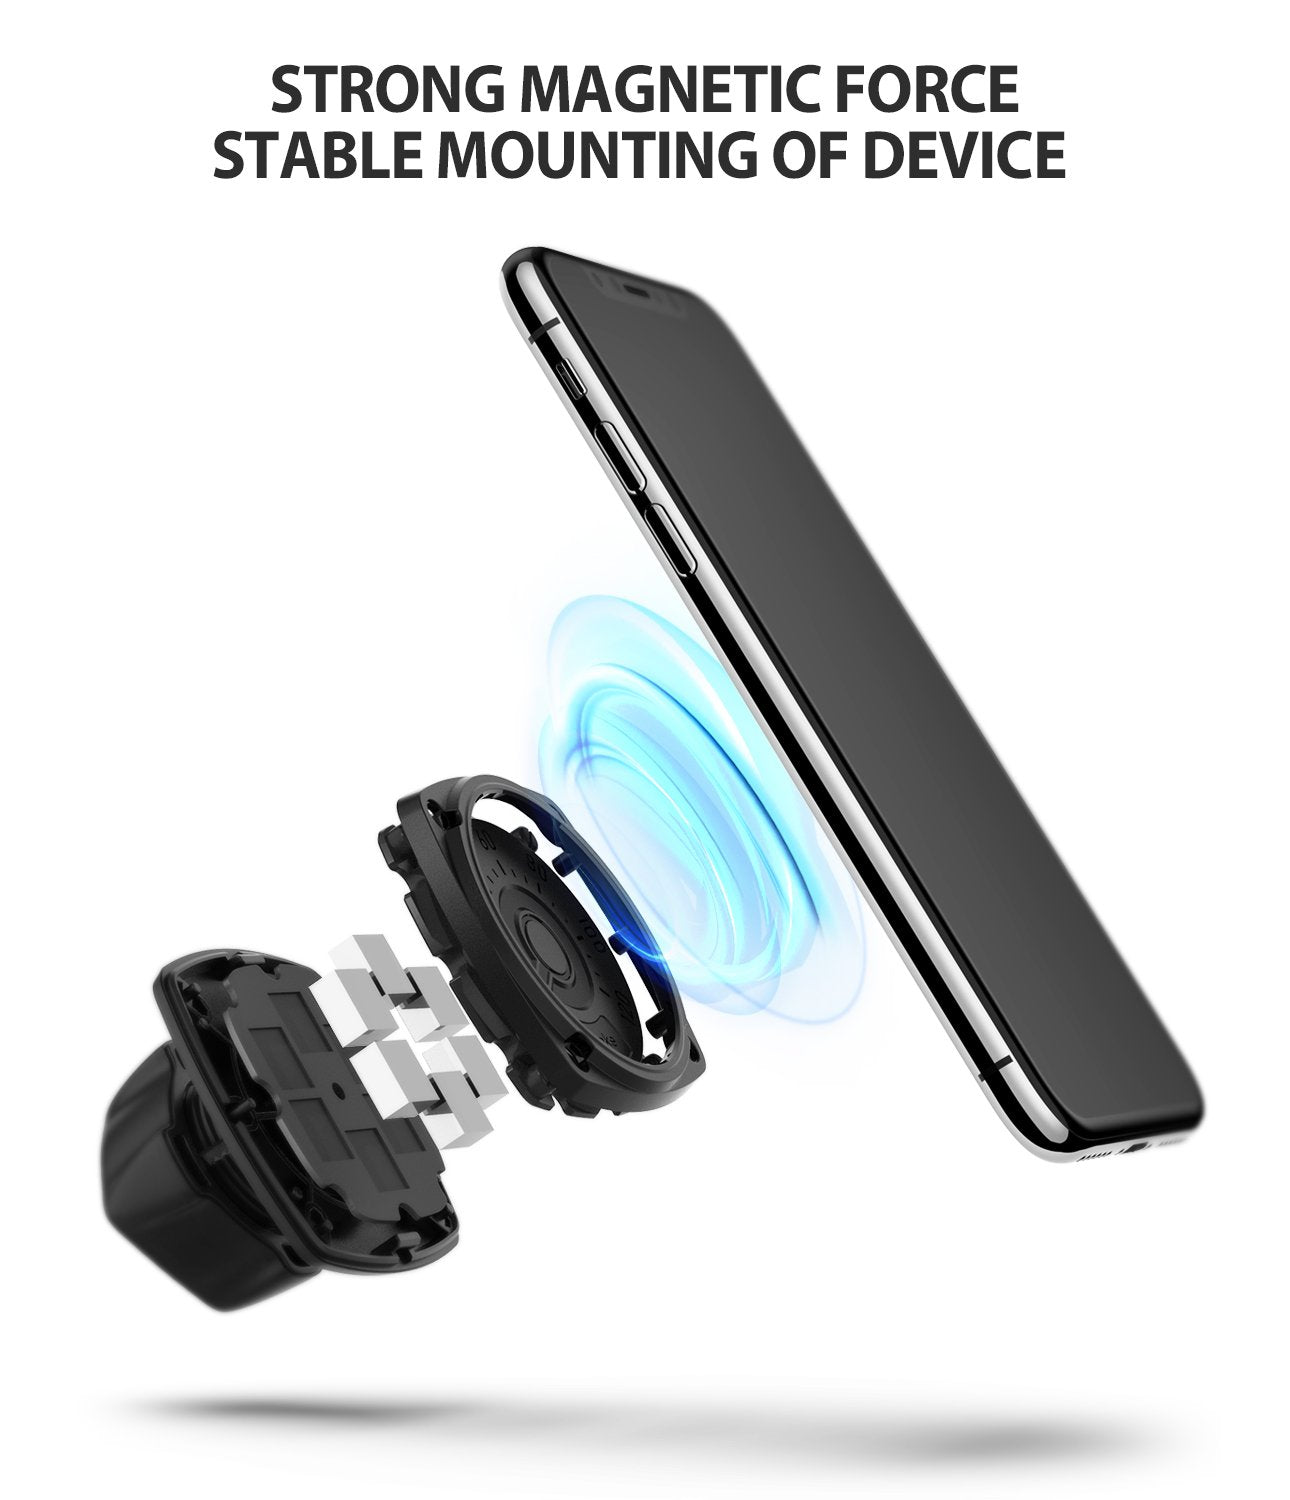 ringke dashboard car mount 2 in 1 strong magnetic force for a stable hold of your device